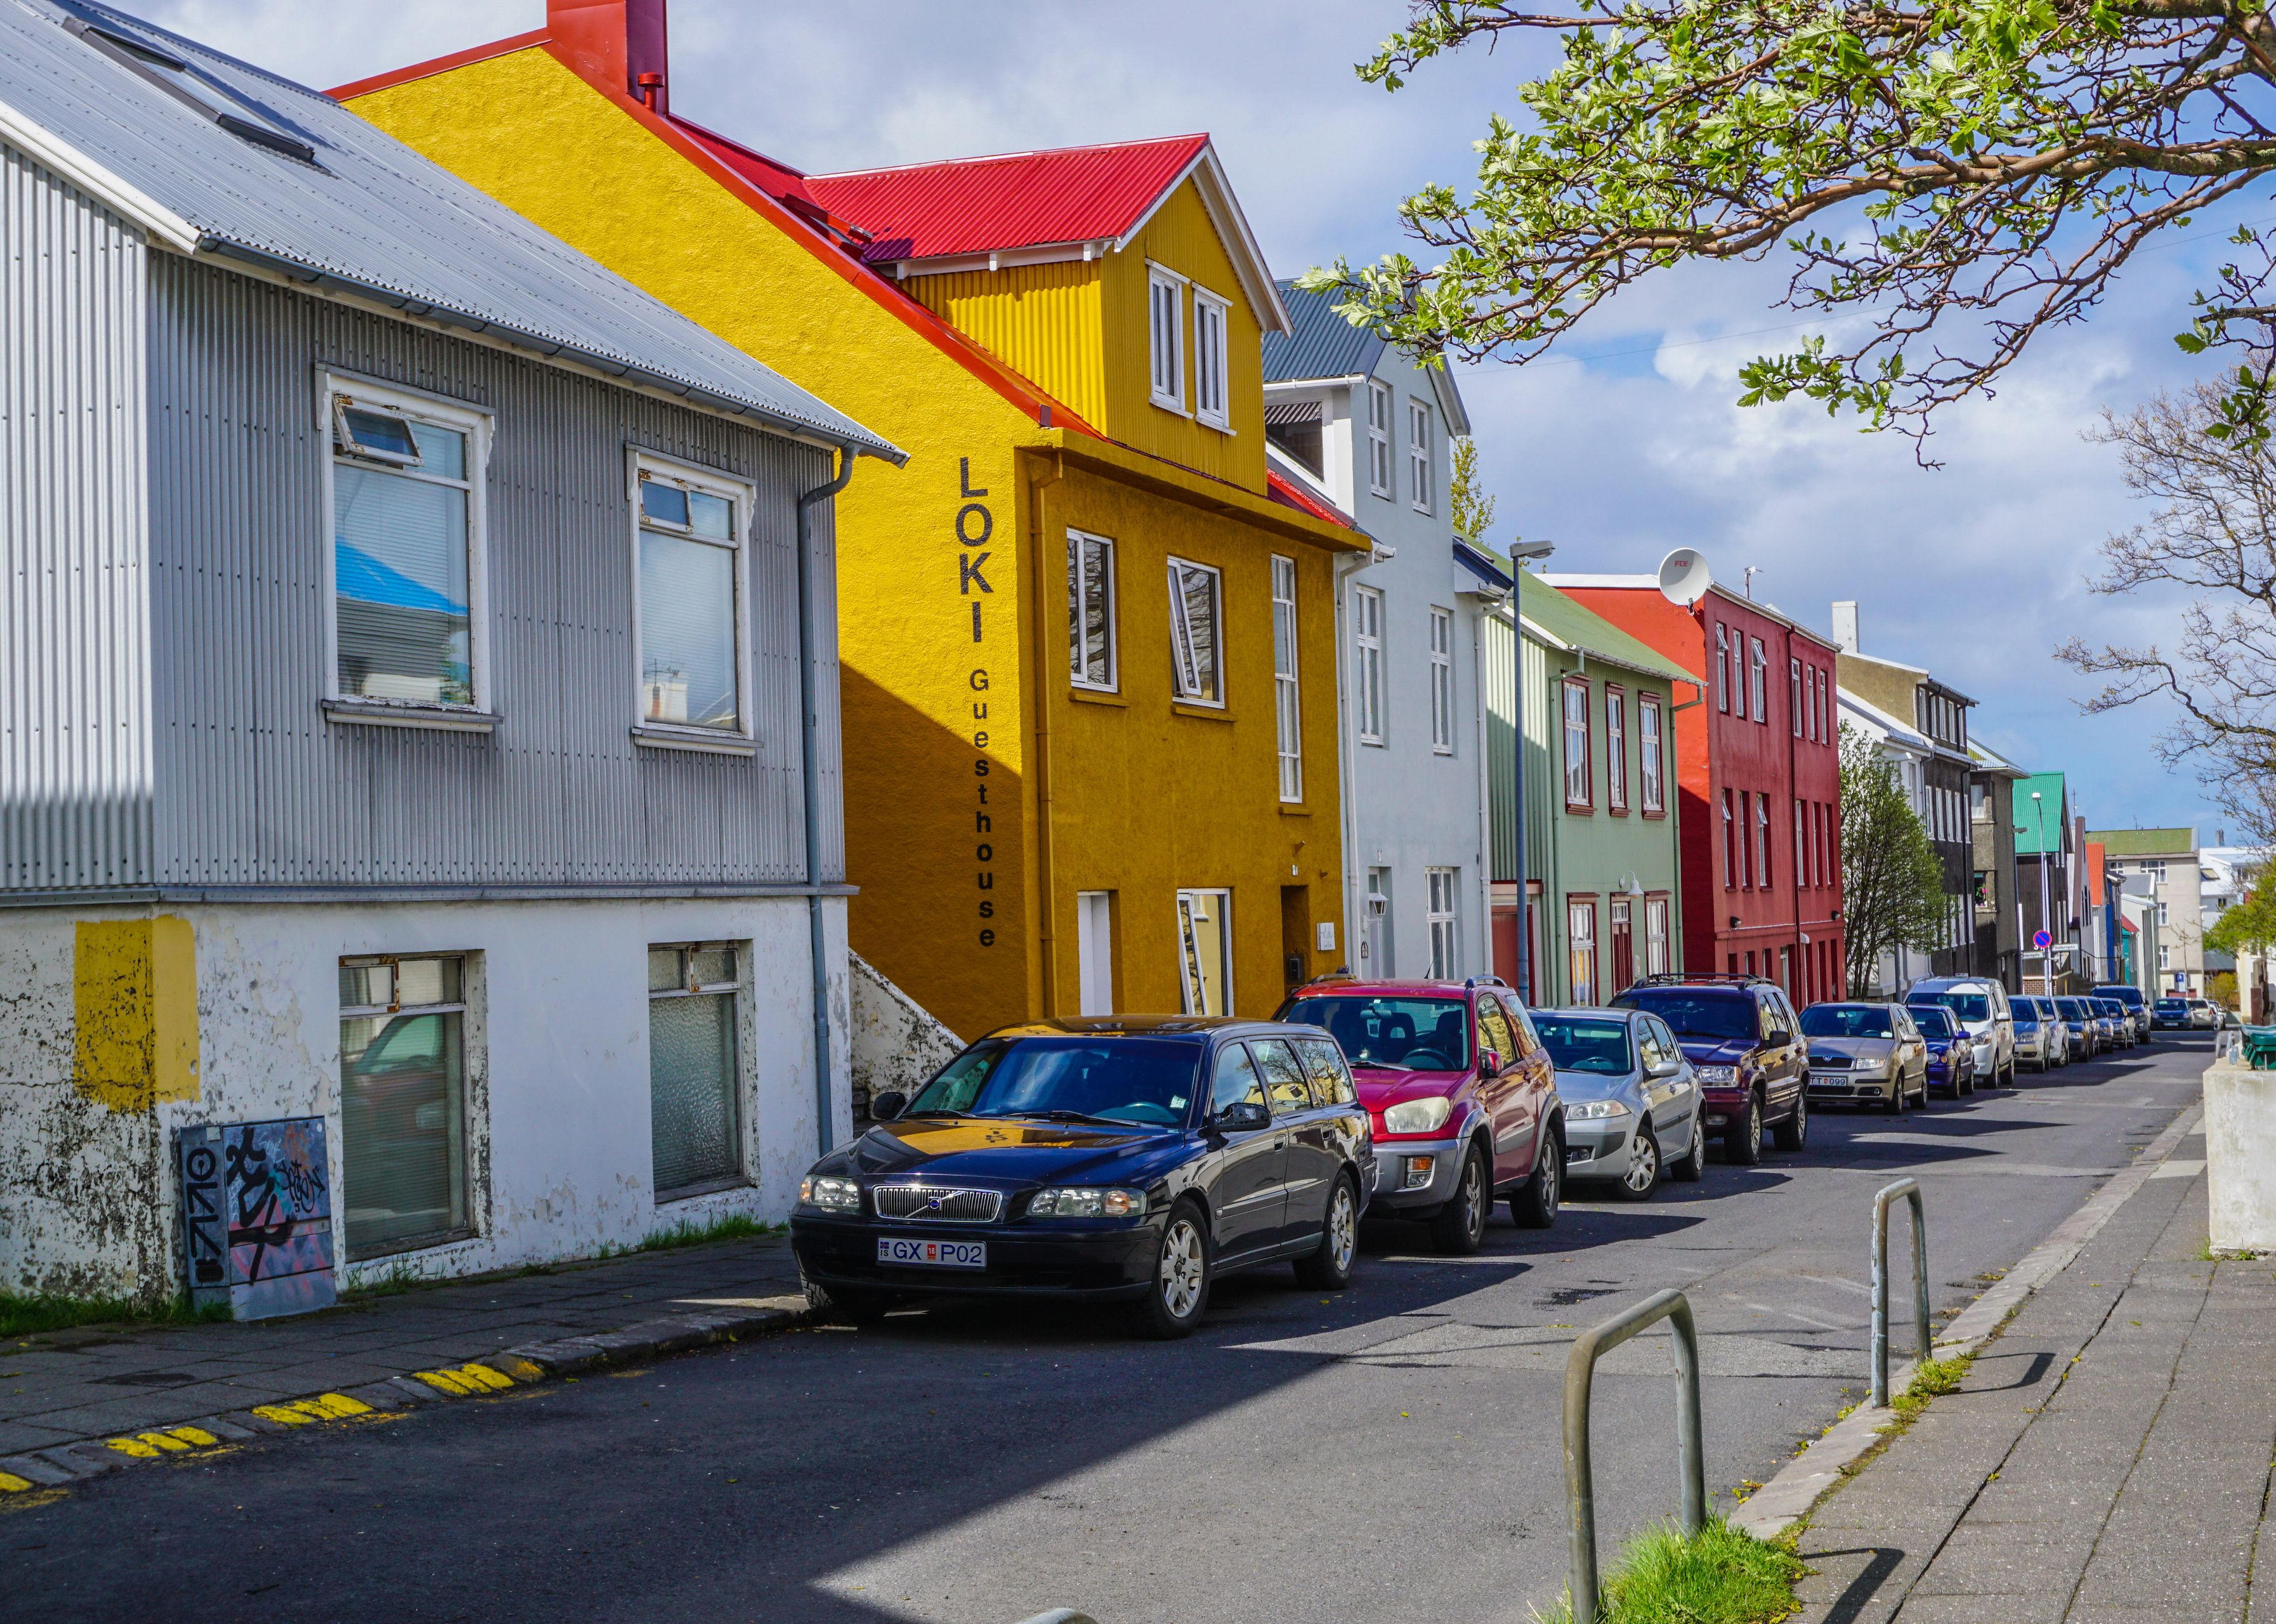 Colorful traditional houses lining the streets of Reykjavik, Iceland